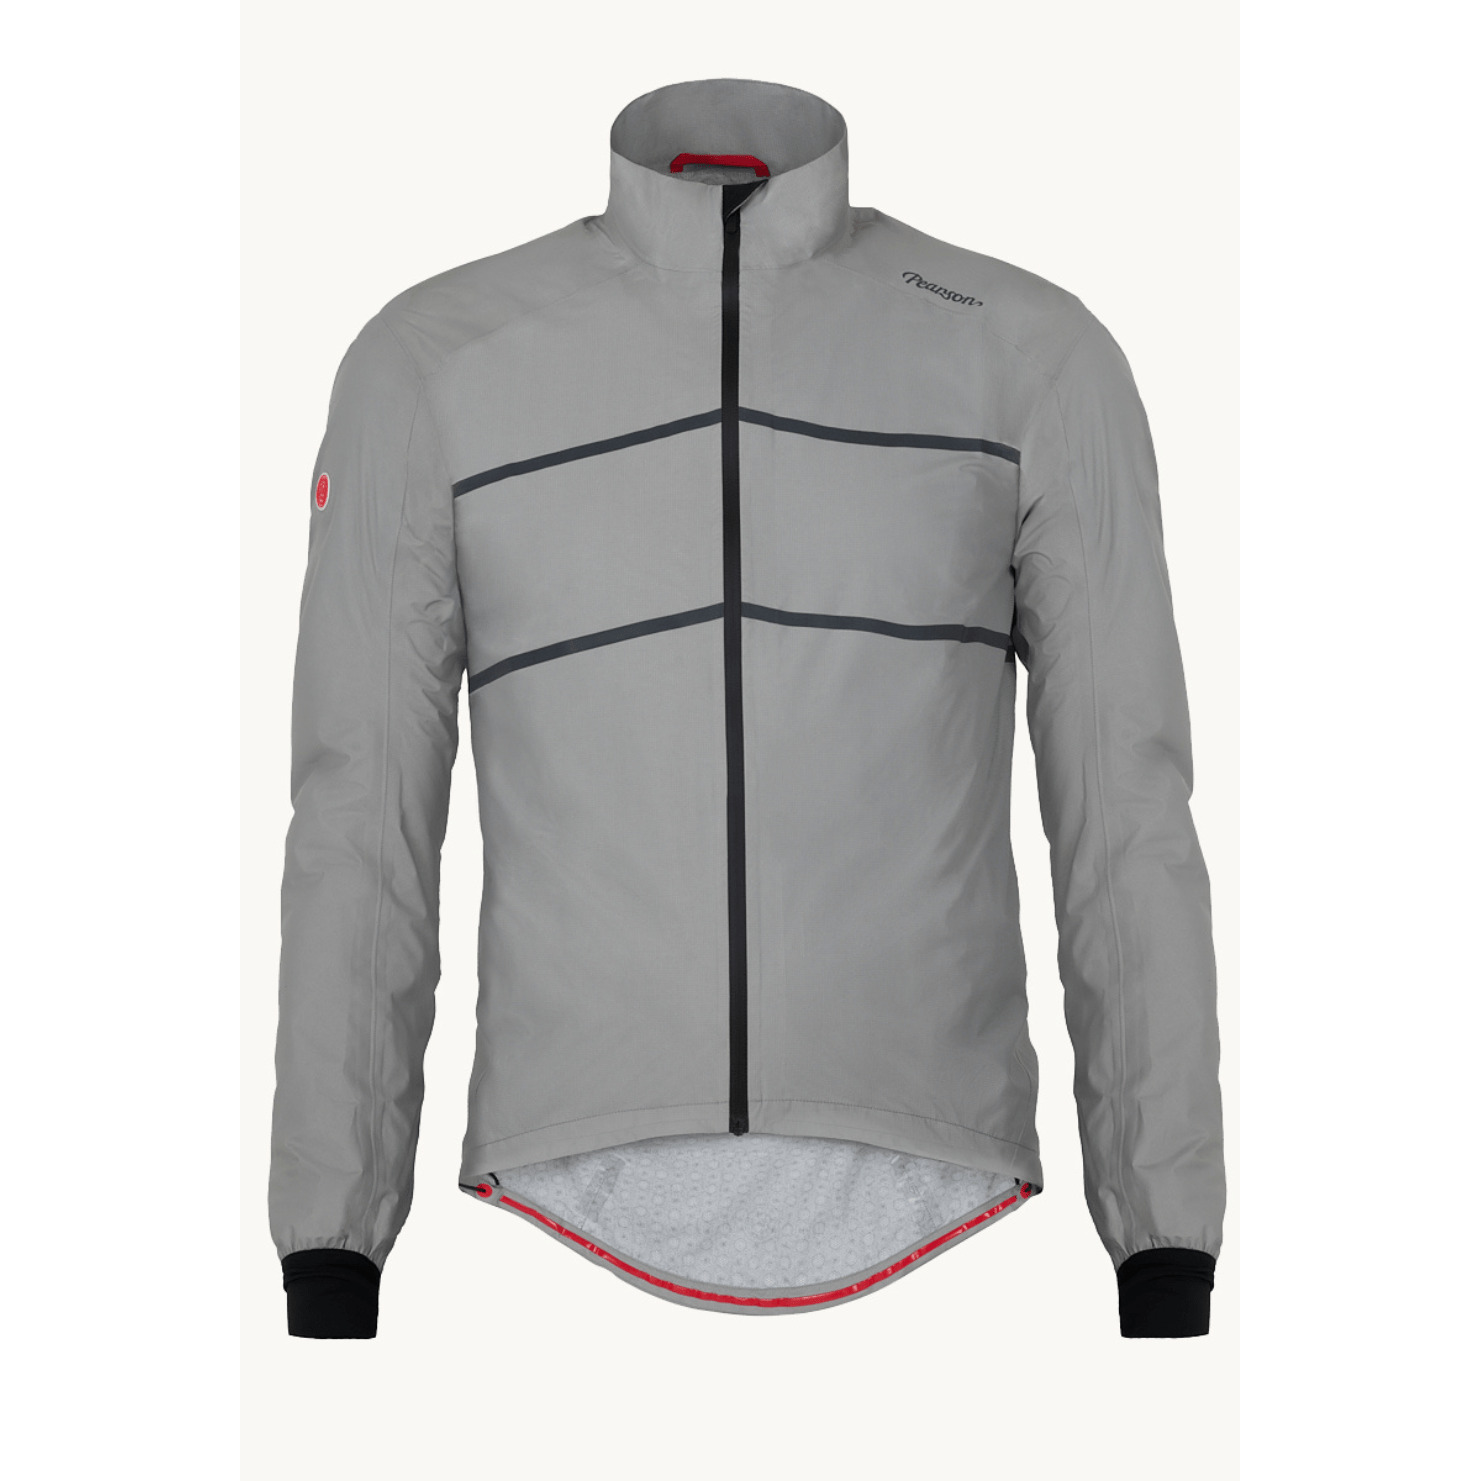 Pearson Cycles Pearson 1860, Bryter Layter - Waterproof Jacket | Choice of colours | A highly breathable, lightweight and fully waterproof jacket designed for all kinds of riding.